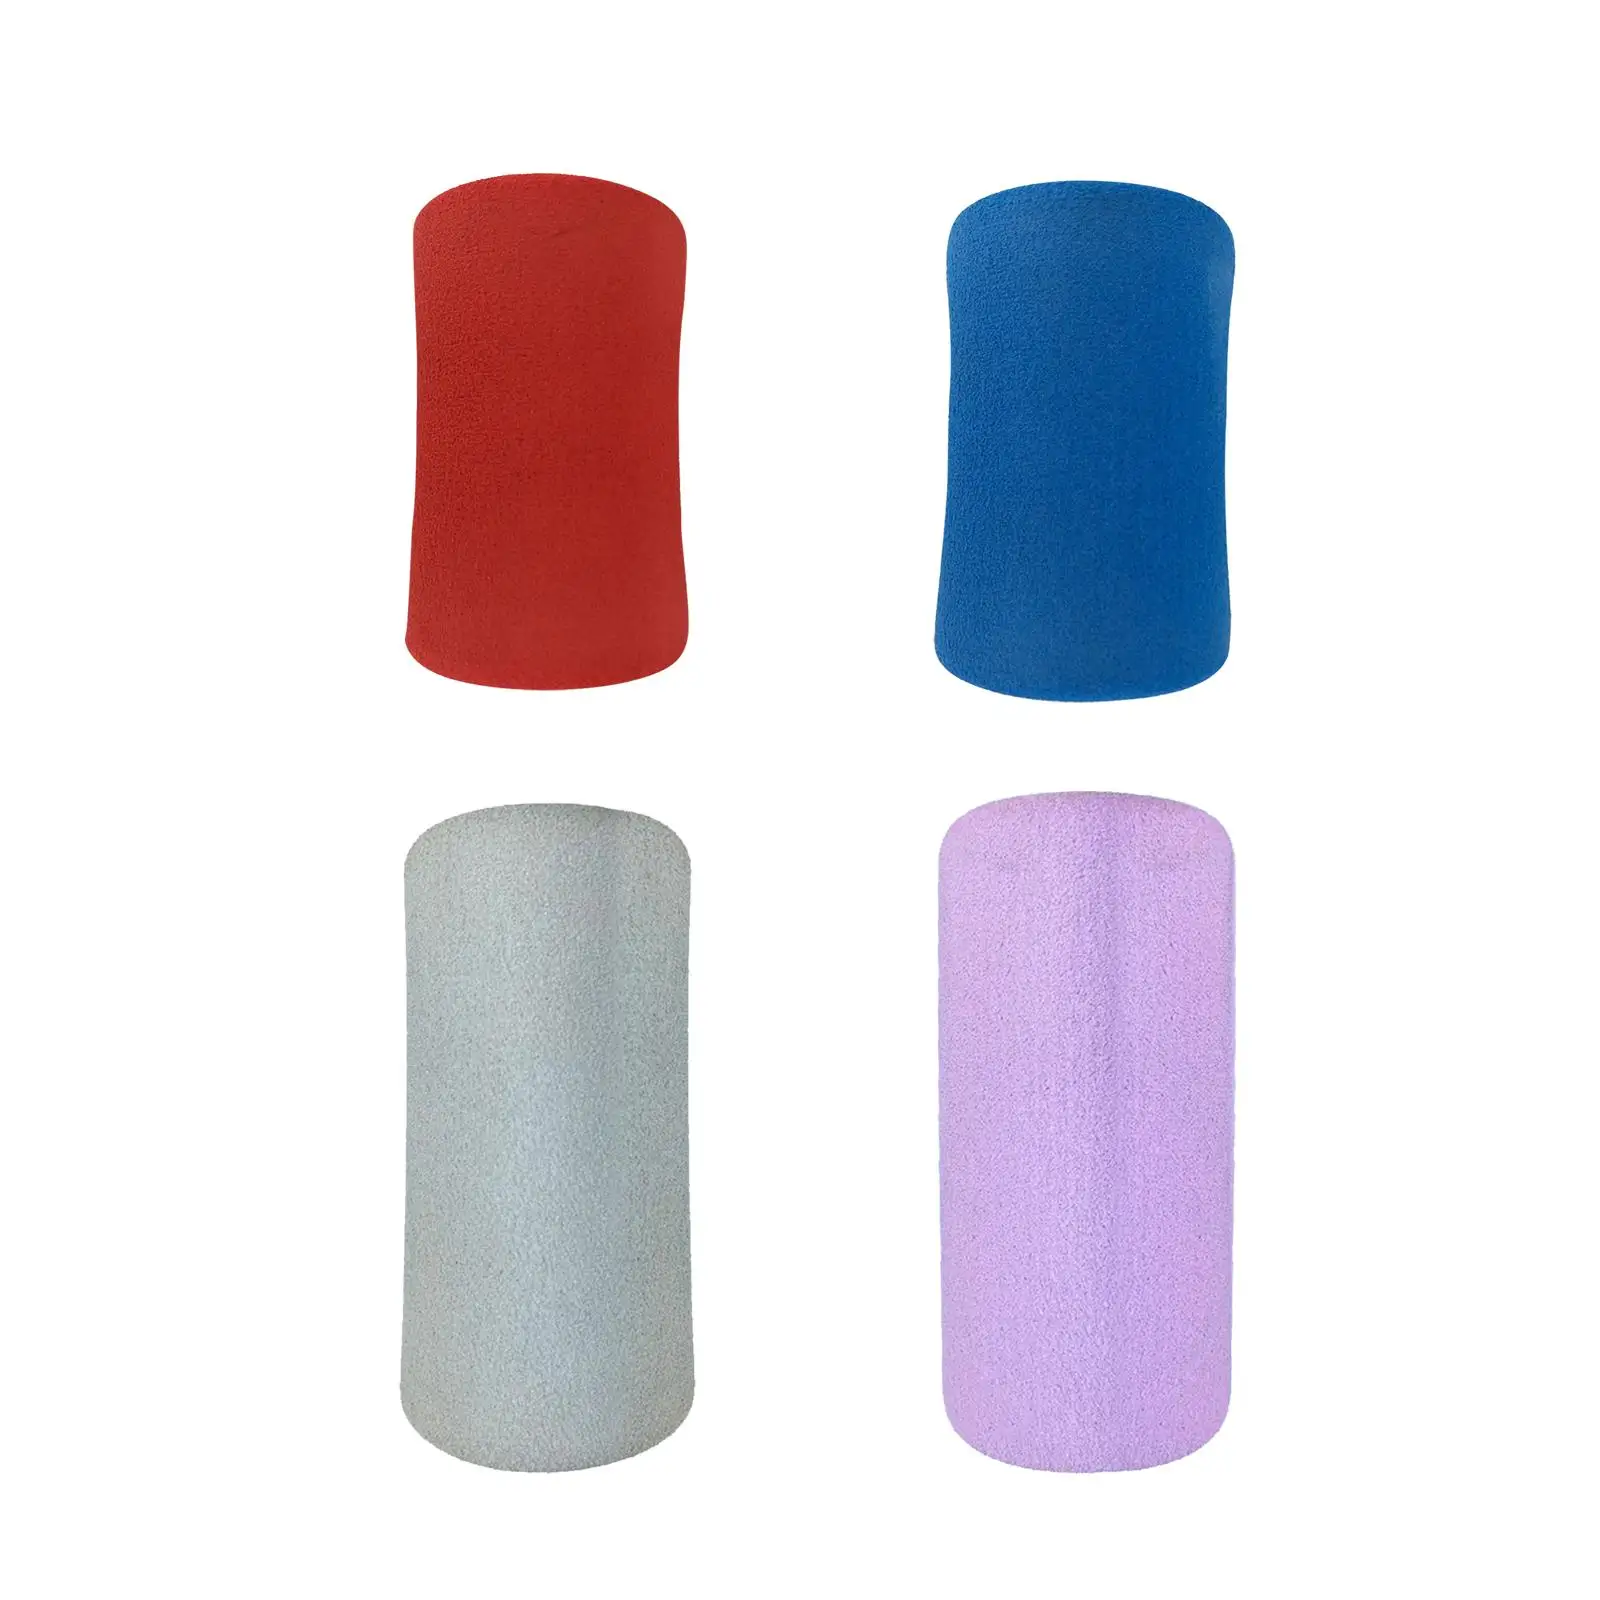 Foam Foot Pads Rollers Replacement Sit up Bench Foam Workout Machine Workout Bench Ab Machine Home Gym Abdominal Trainer